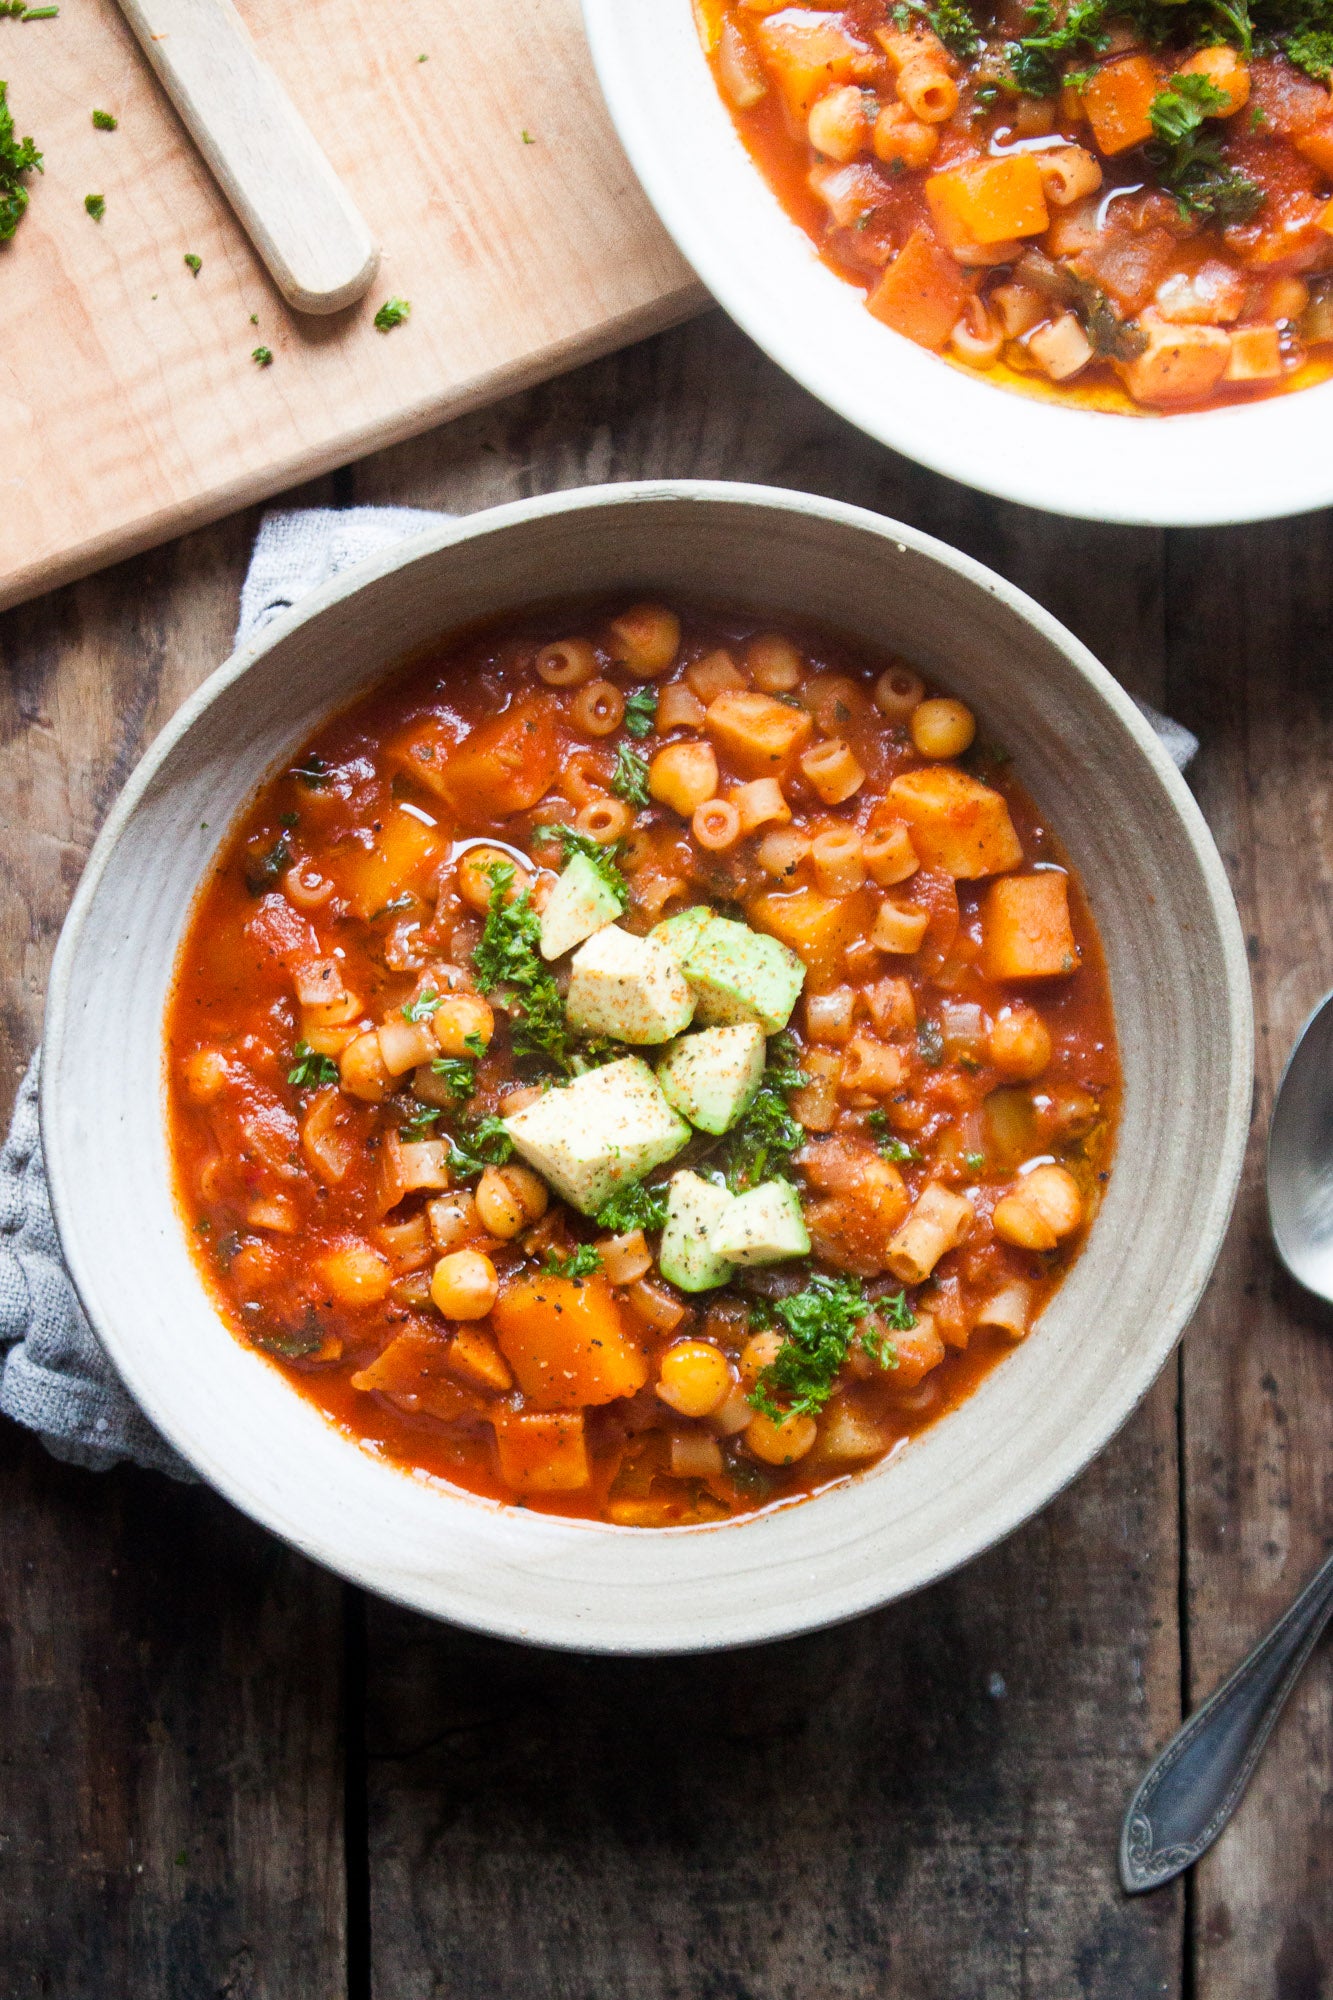 Winter Chickpea Minestrone - in pursuit of more